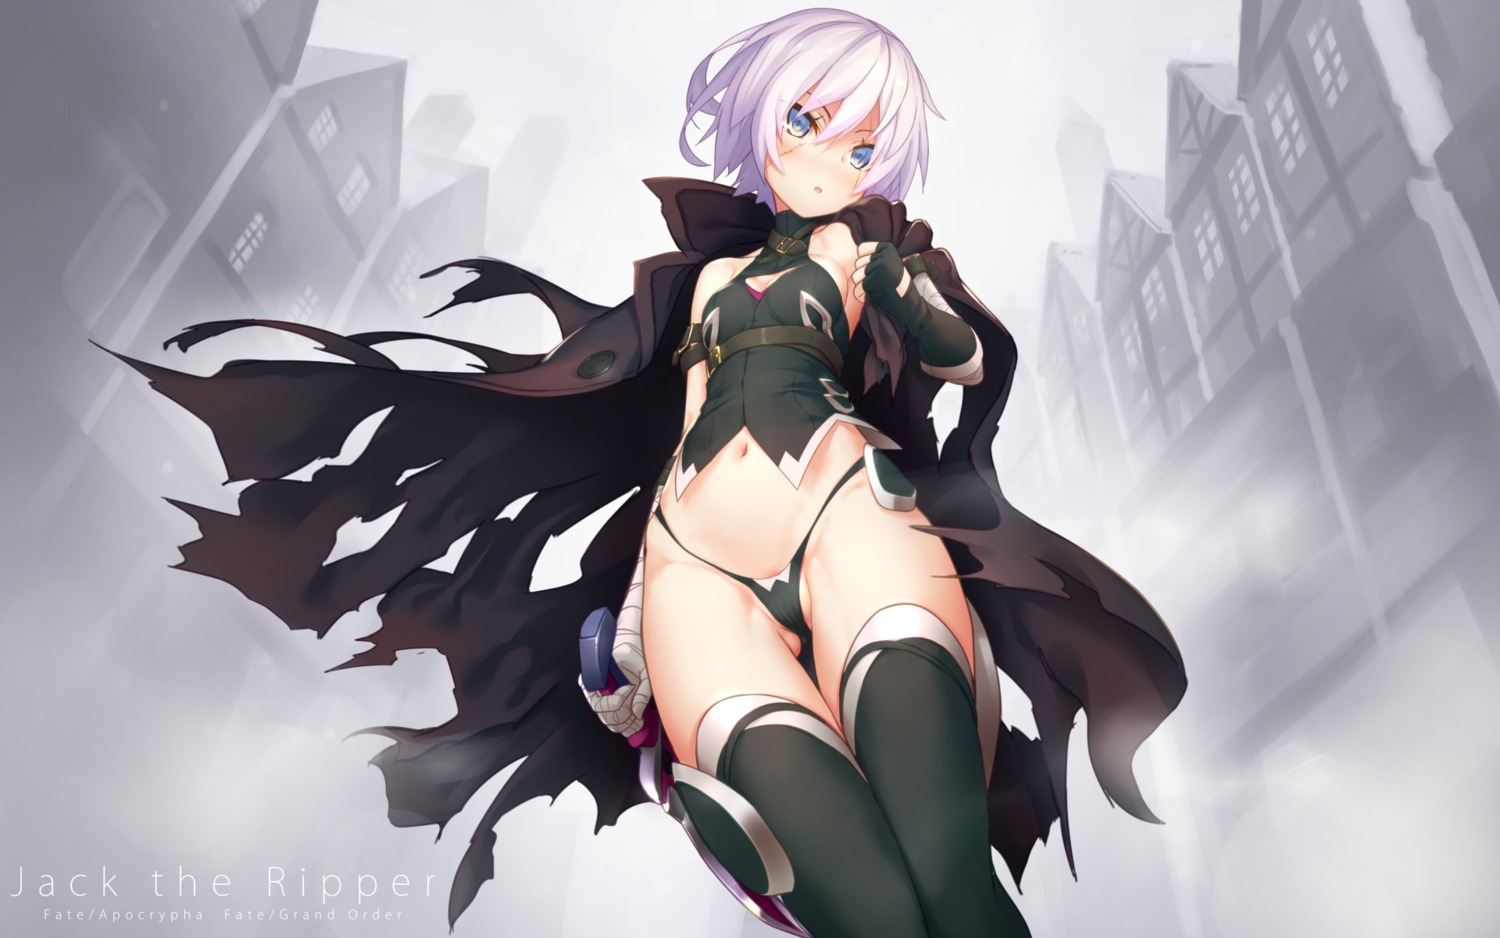 bandages cleavage dobunezumi fate/apocrypha fate/grand_order fate/stay_night jack_the_ripper pantsu thighhighs torn_clothes wallpaper weapon